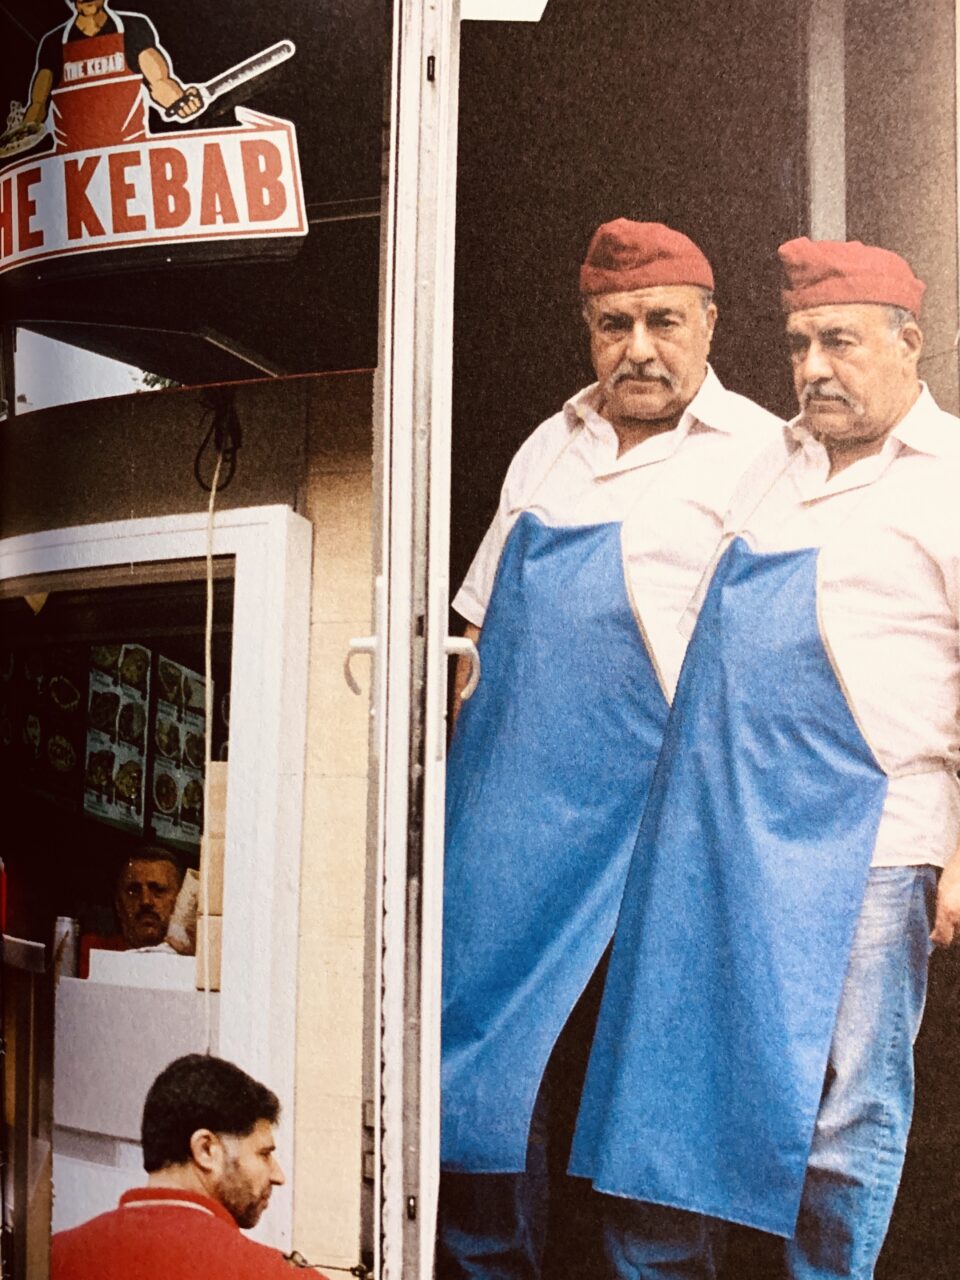 The Kebab Project